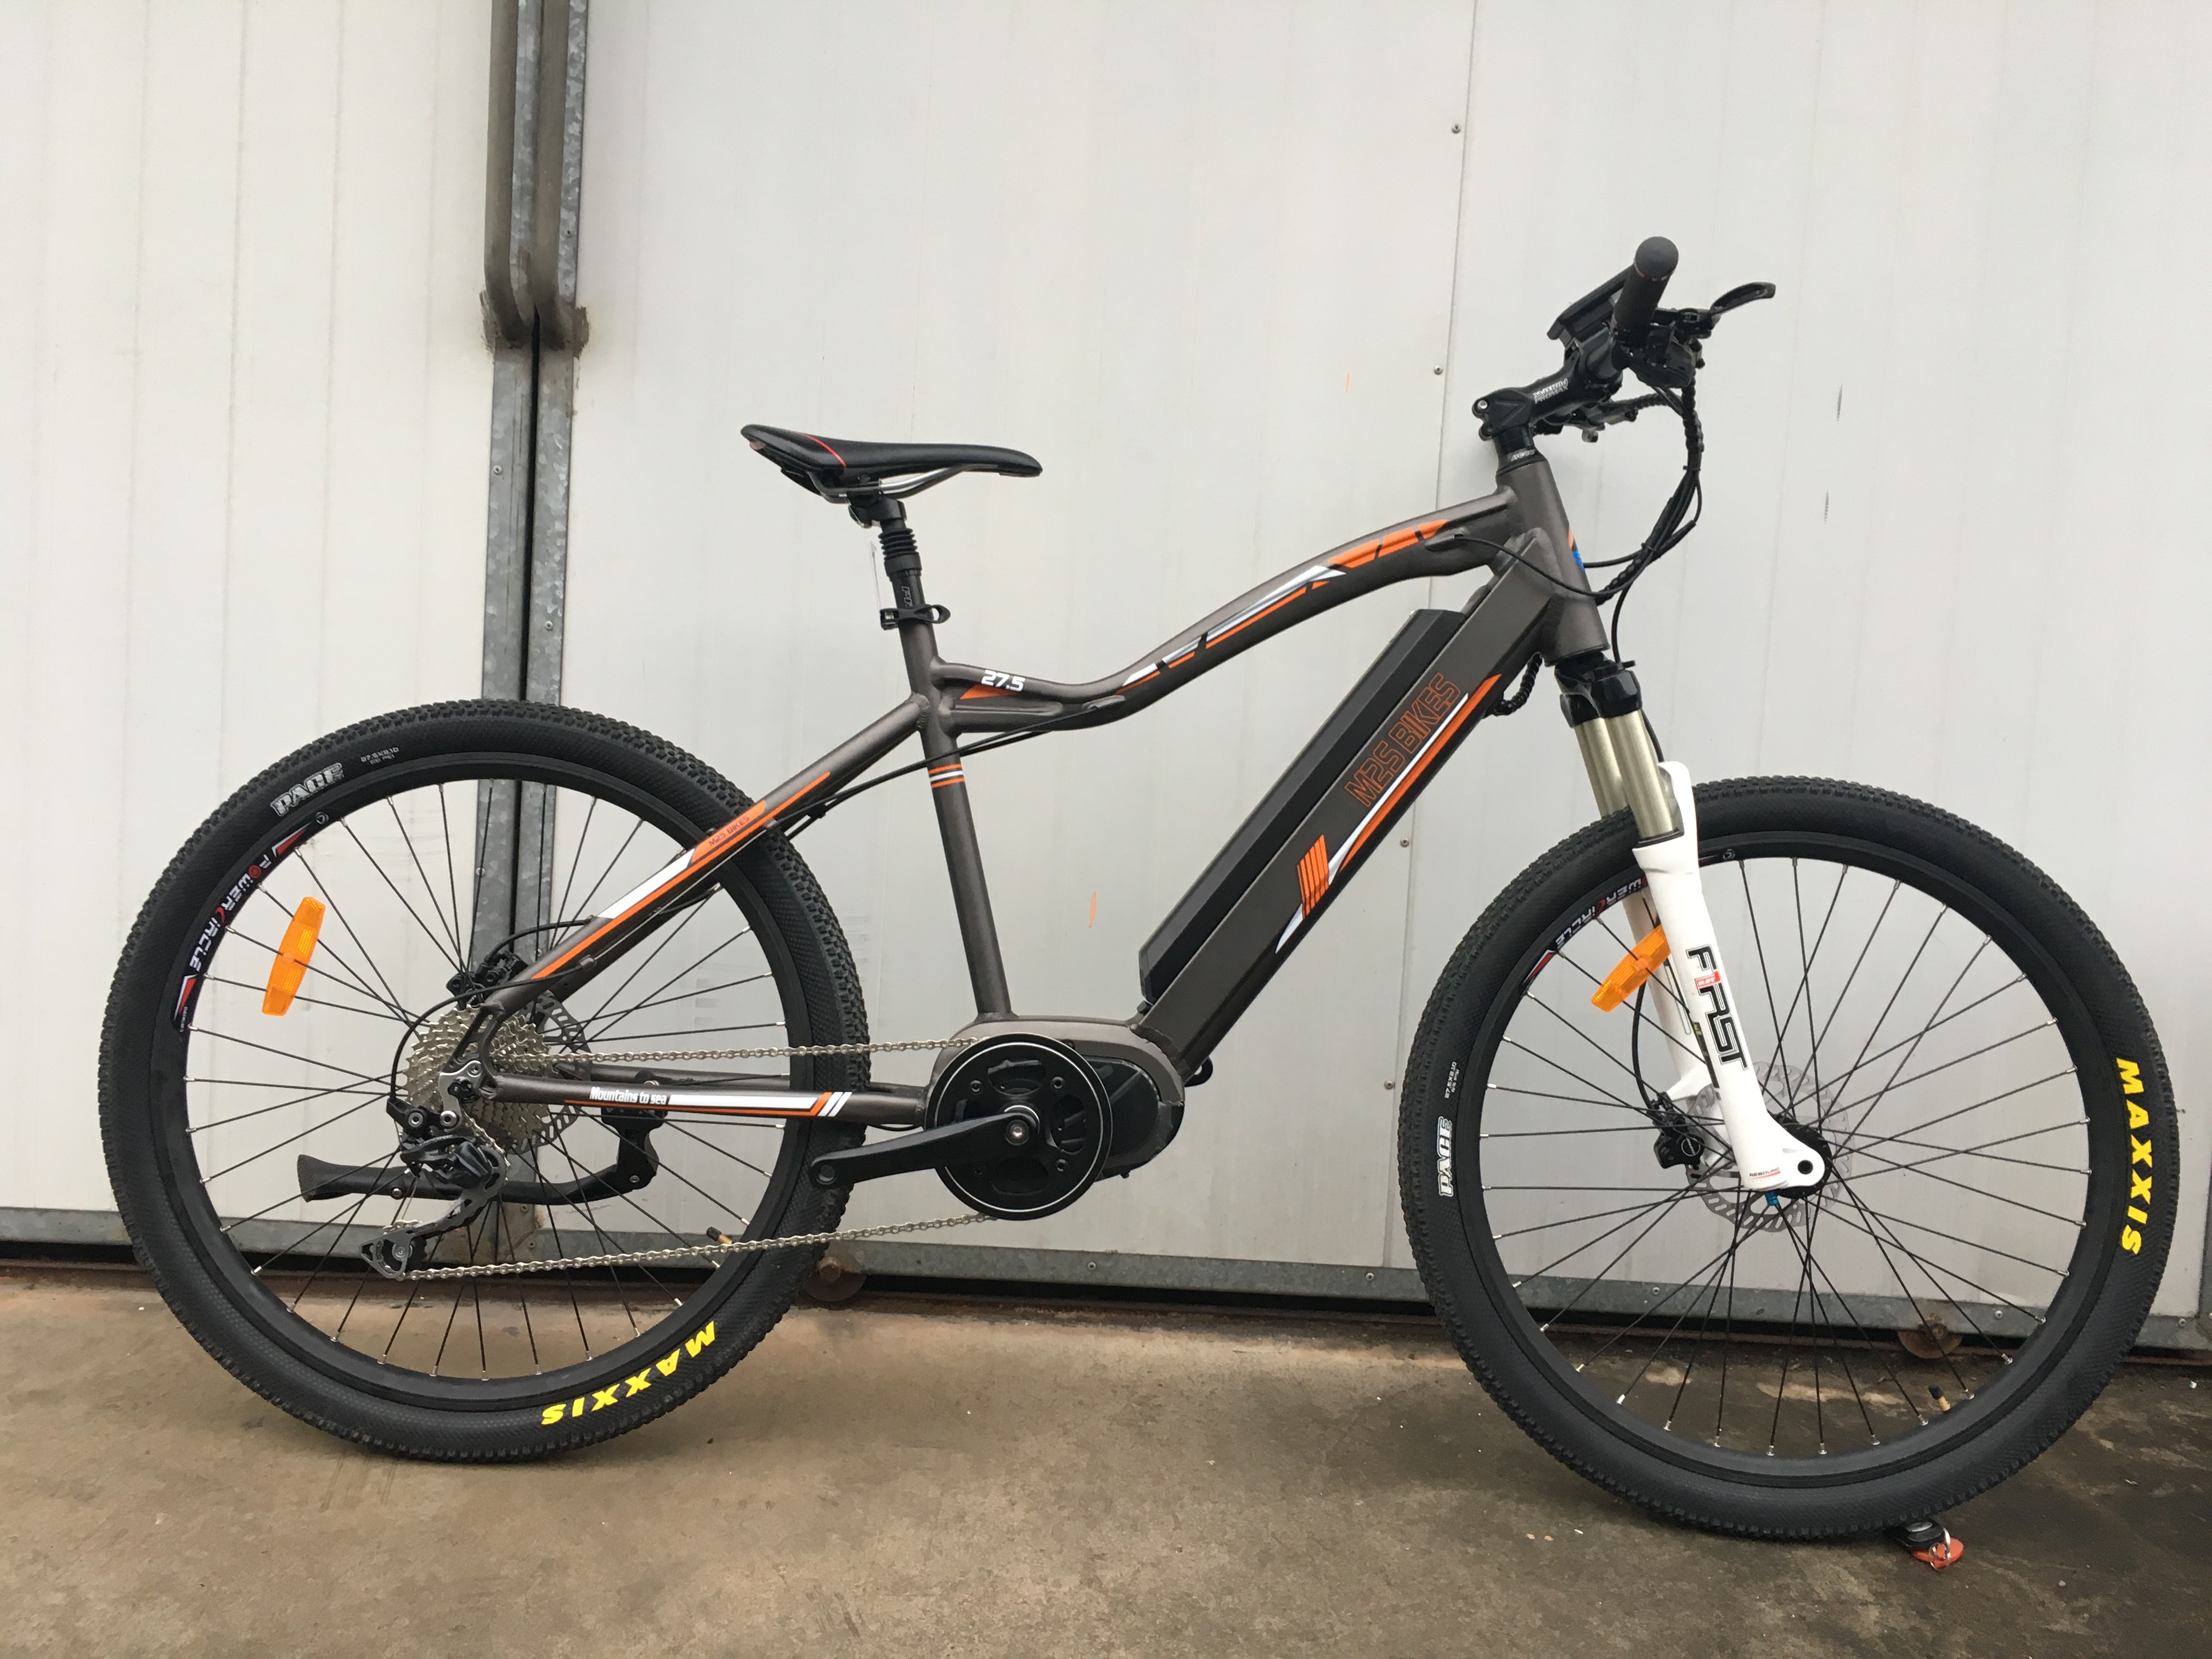 New Line of Bafang Max Mid Drive Bikes | Electric Bike Forums